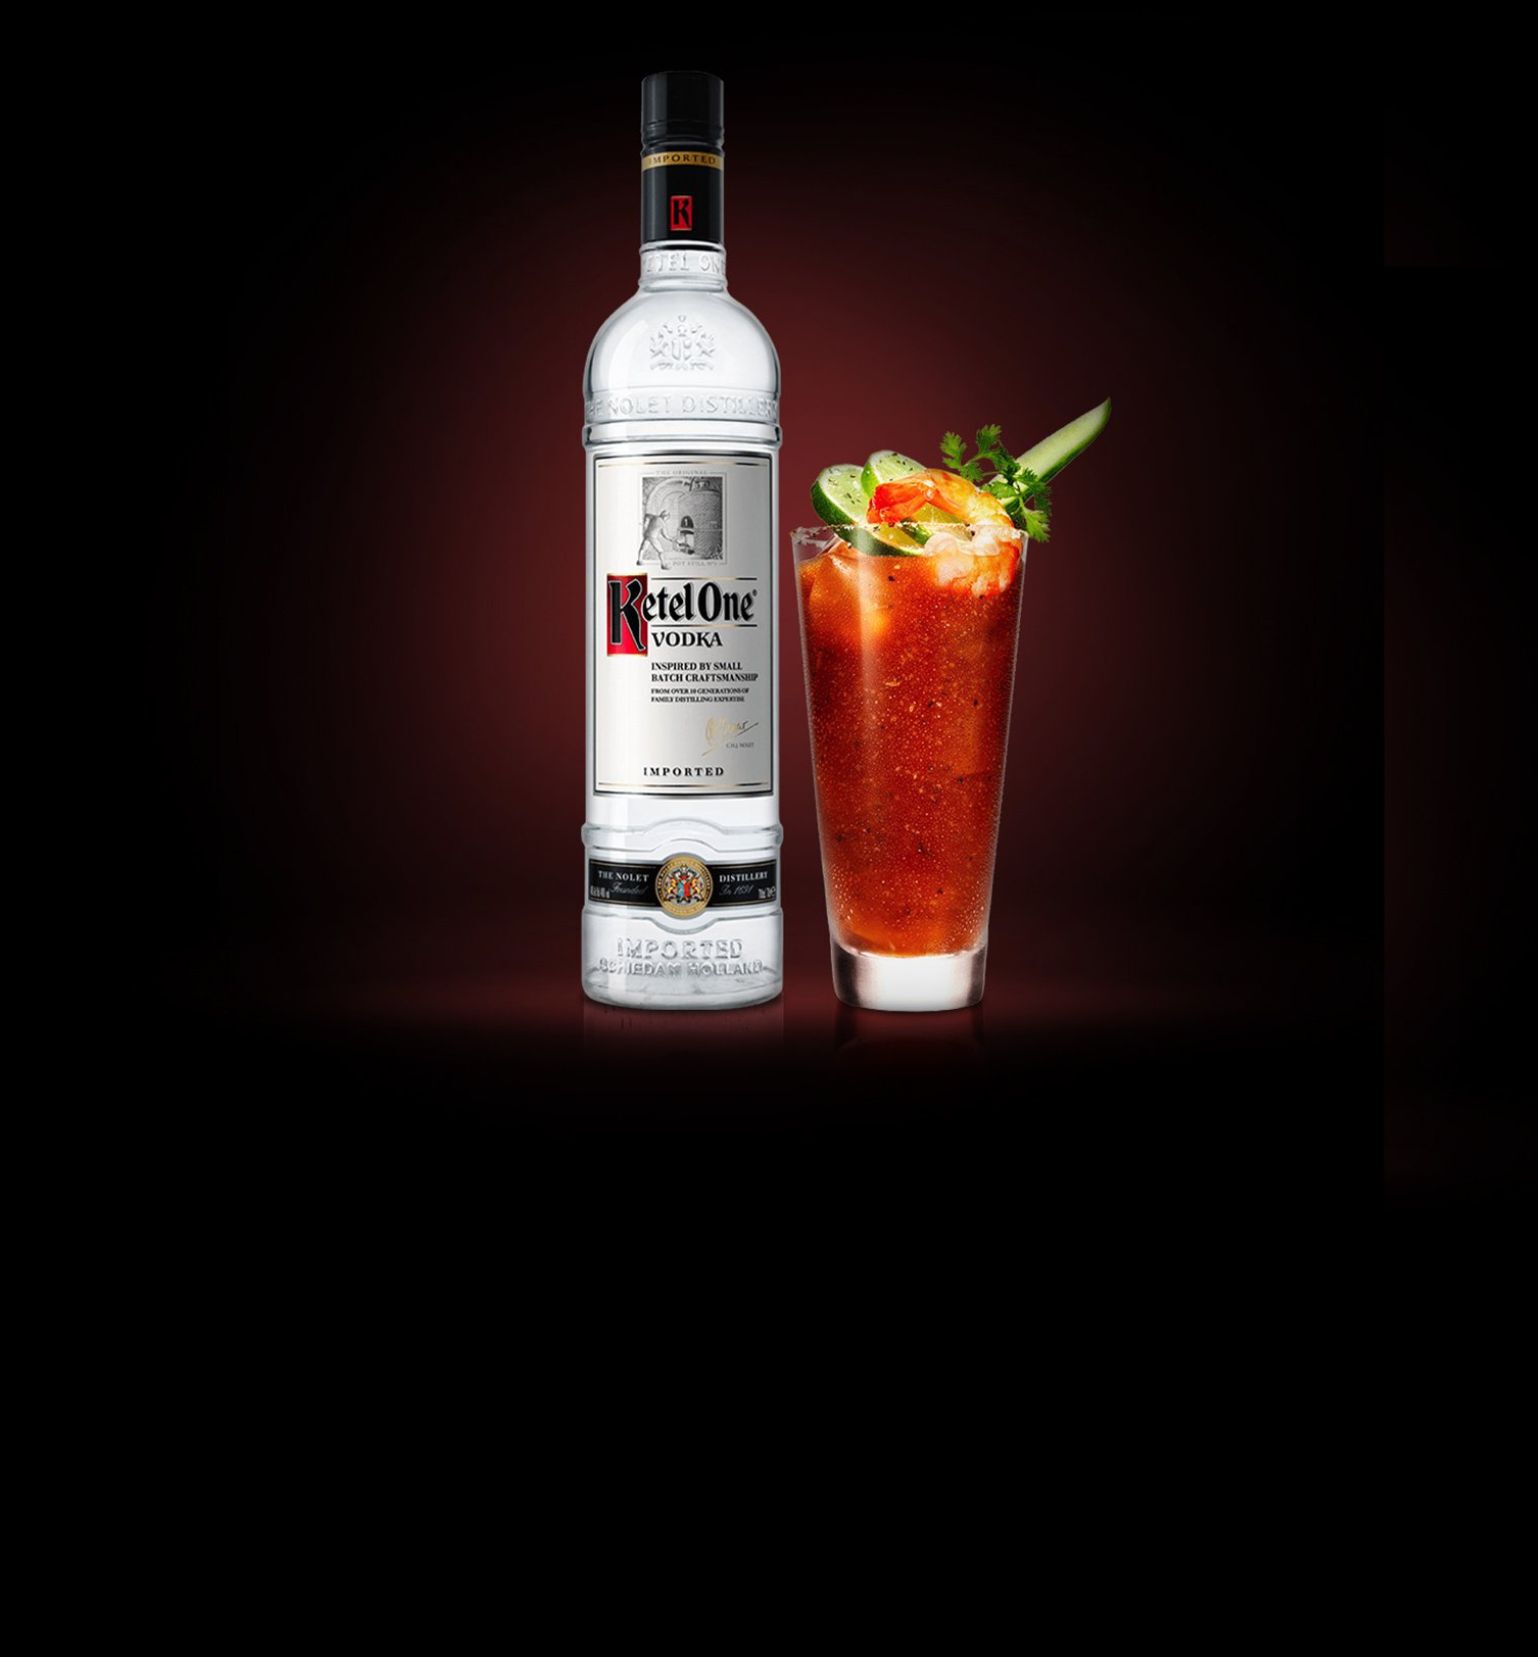 The Ketel One Bloody Mary Cocktail